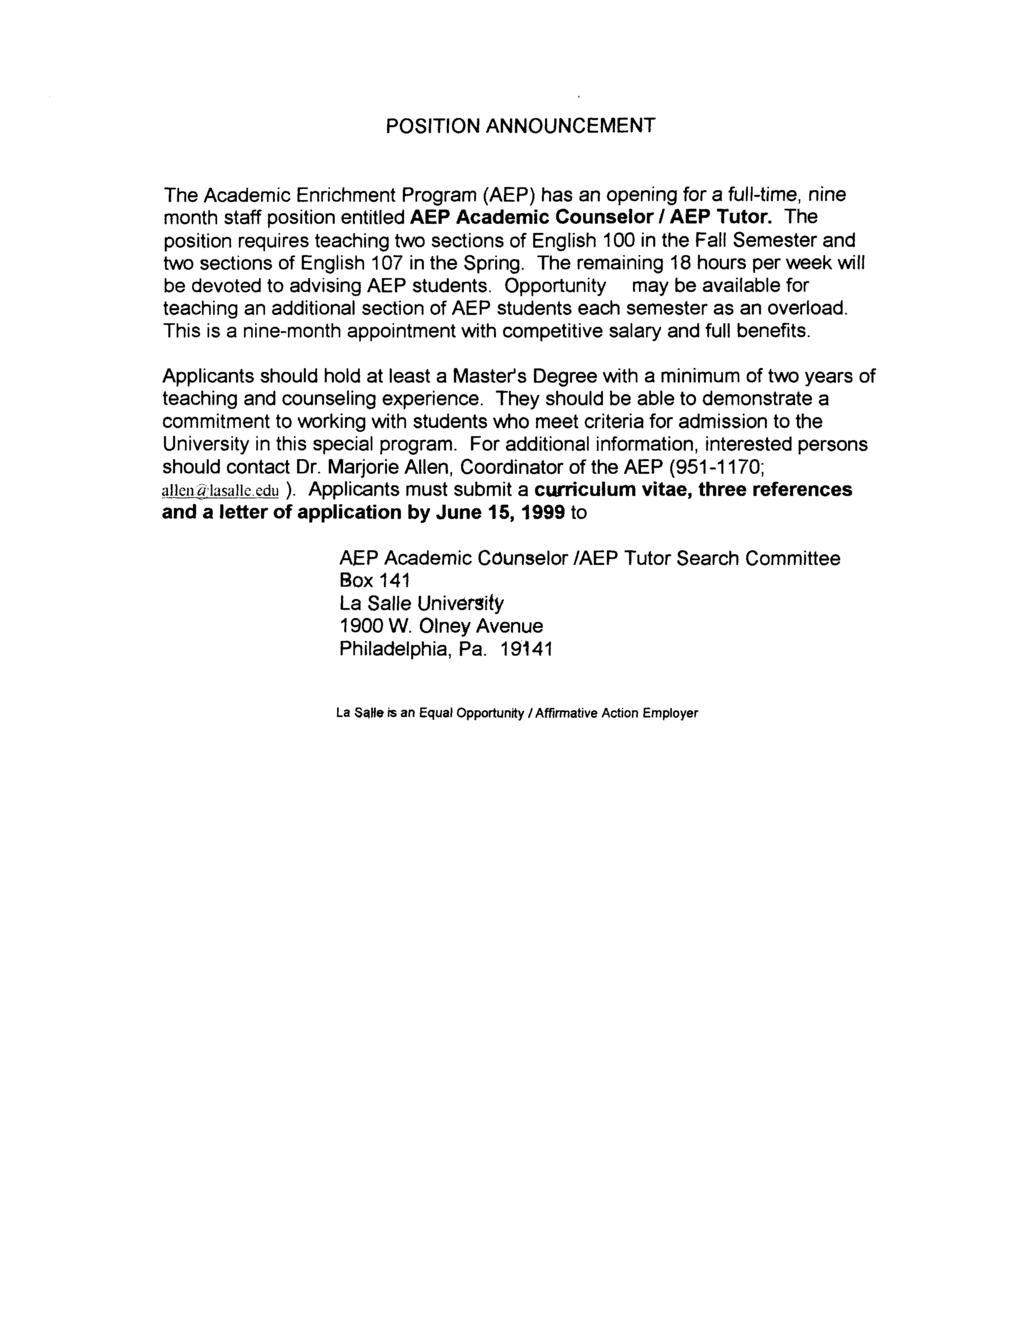 POSITION ANNOUNCEMENT The Academic Enrichment Program (AEP) has an opening for a full-time, nine month staff position entitled AEP Academic Counselor /AEP Tutor.